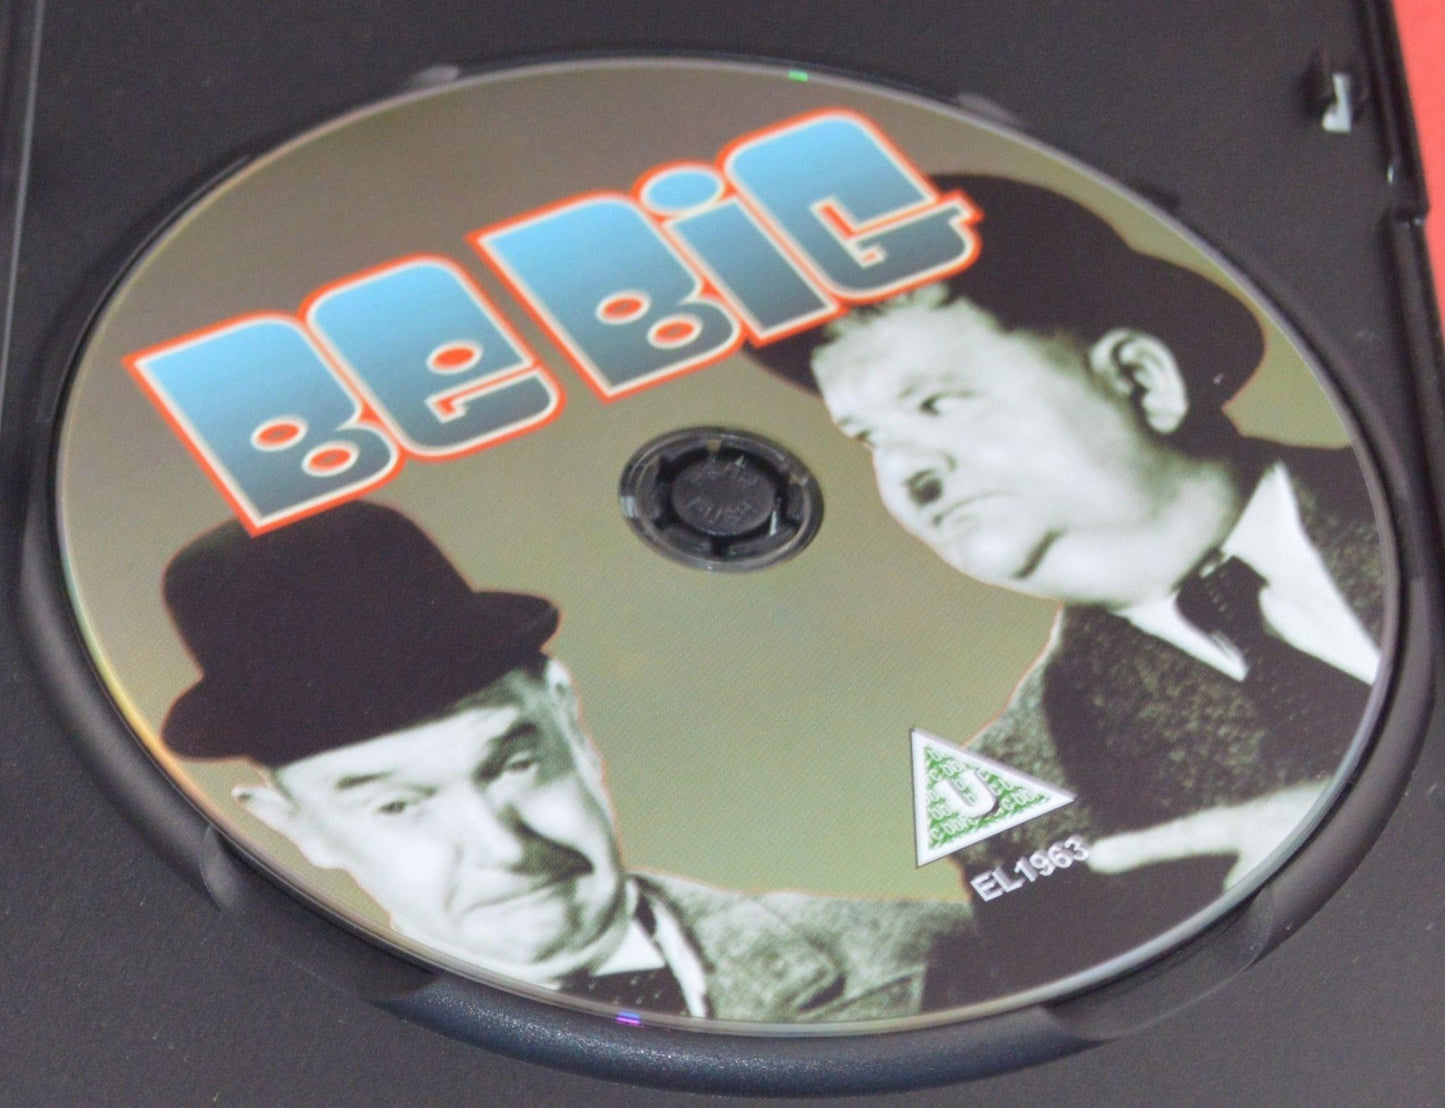 SEALED DVD LAUREL & HARDY CLASSIC SHORTS & LAUREL & HARDY TIT FOR TAT & BE BIG(PREVIOUSLY OWNED)GOOD CONDITION - TMD167207